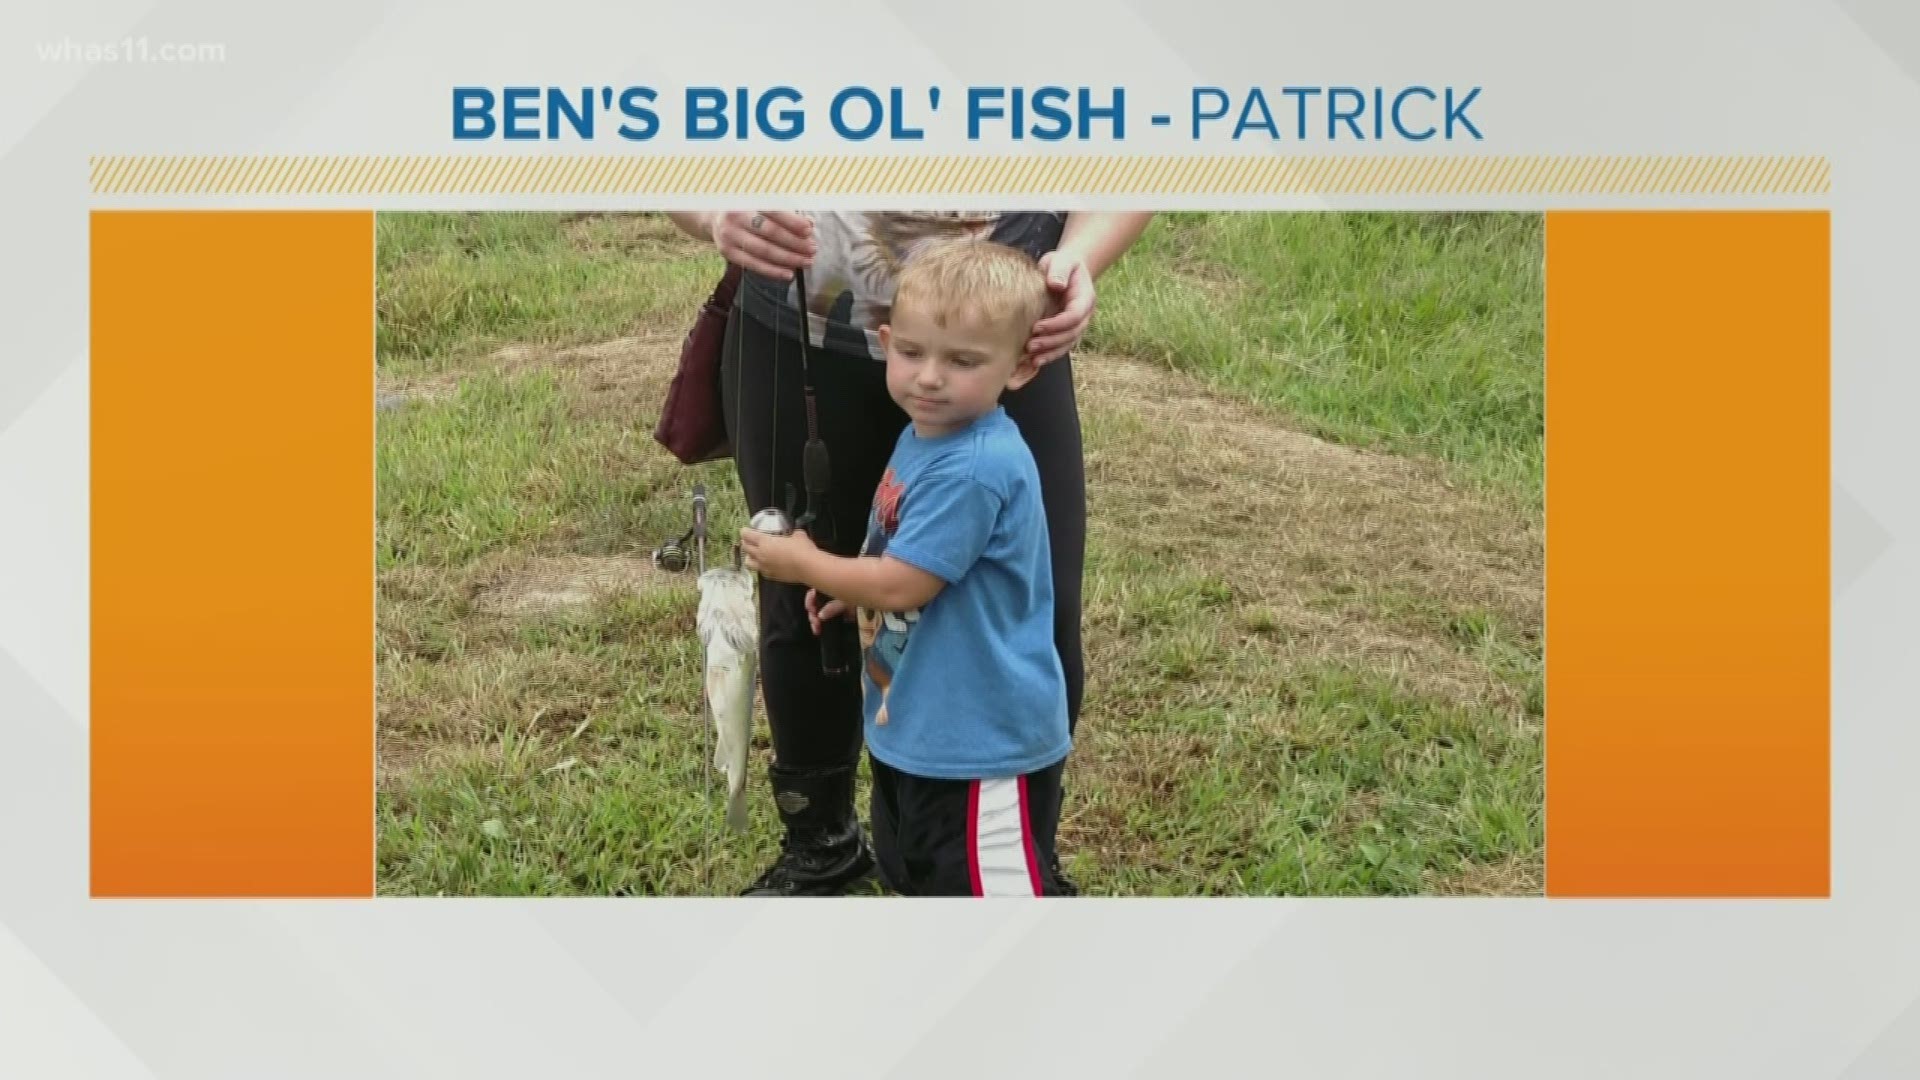 Congrats to Patrick on being this week's Big Ol' Fish feature!